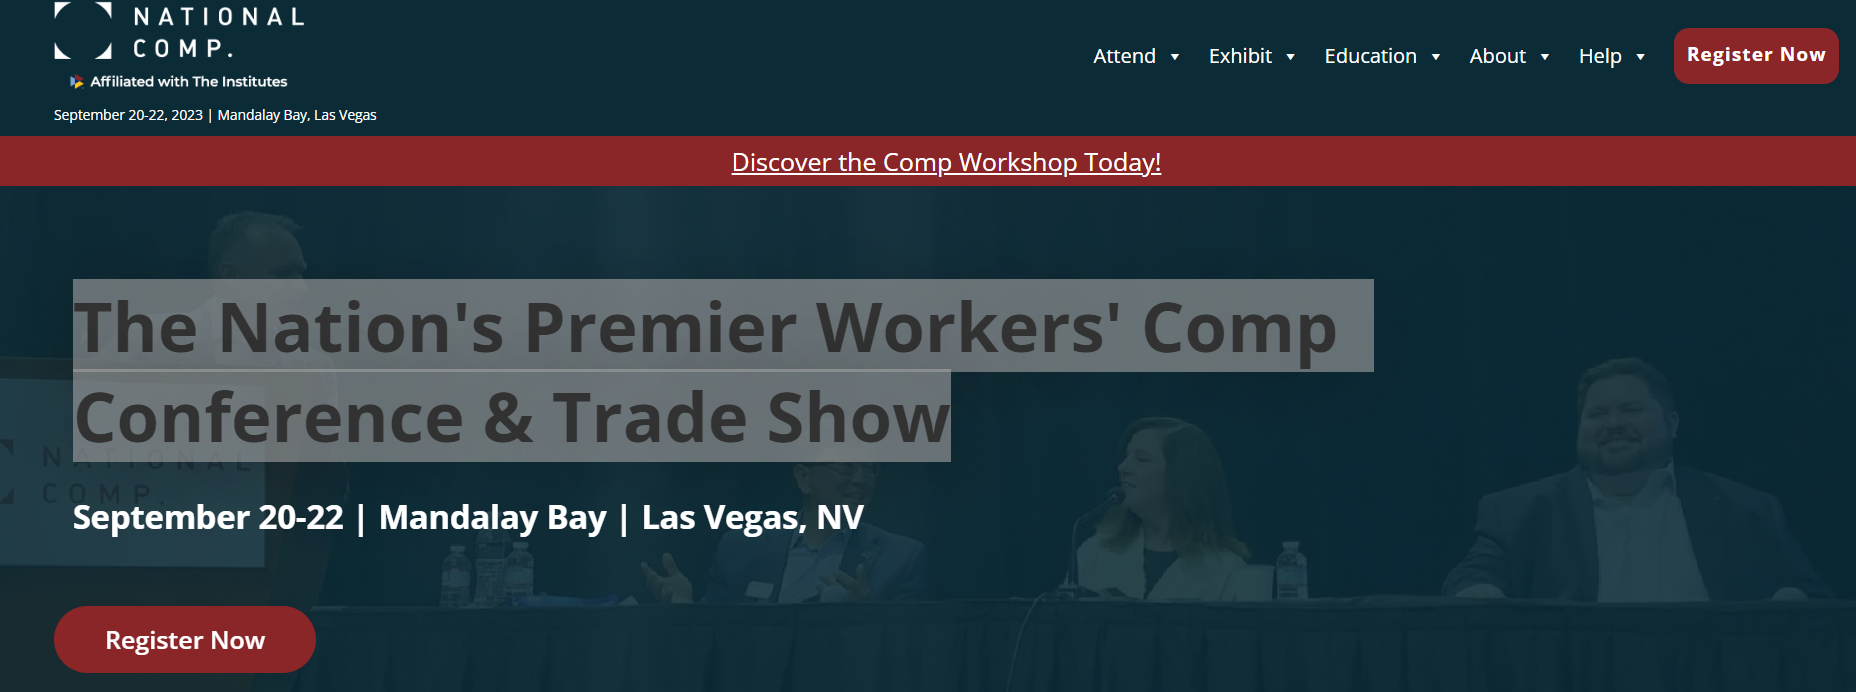 conf and trade show.png